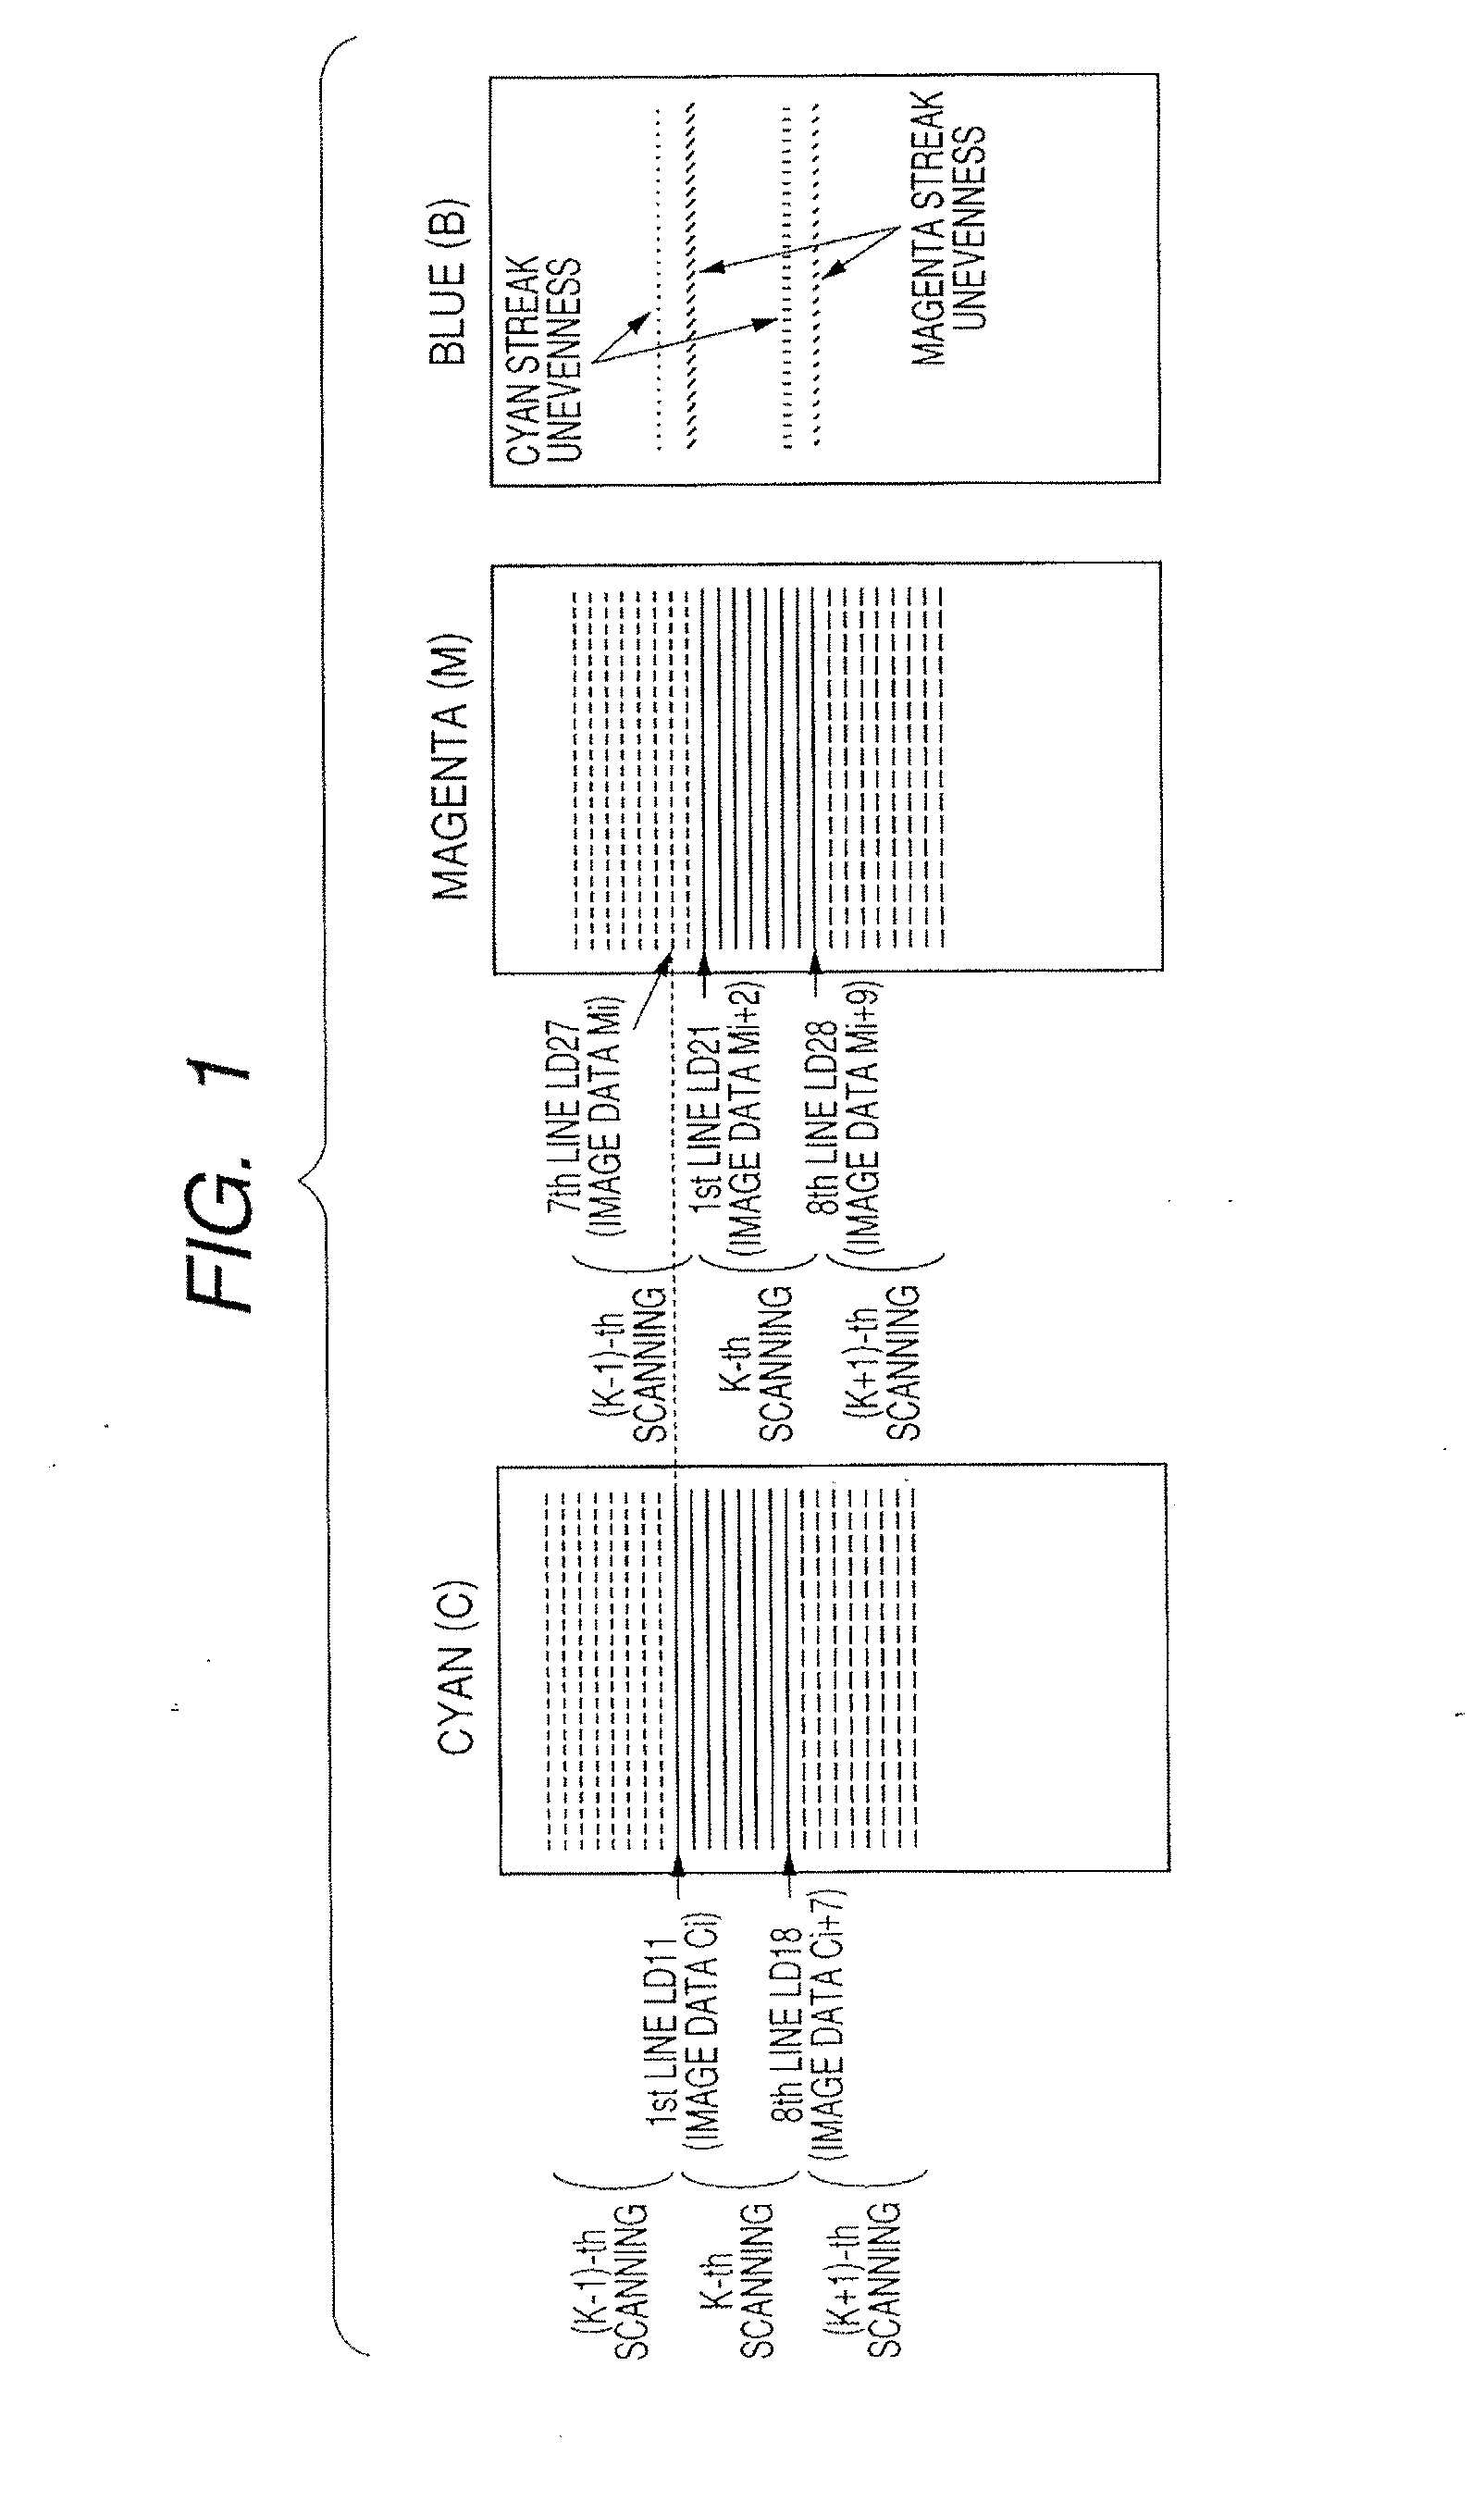 Optical scanning apparatus and color image forming apparatus using the same